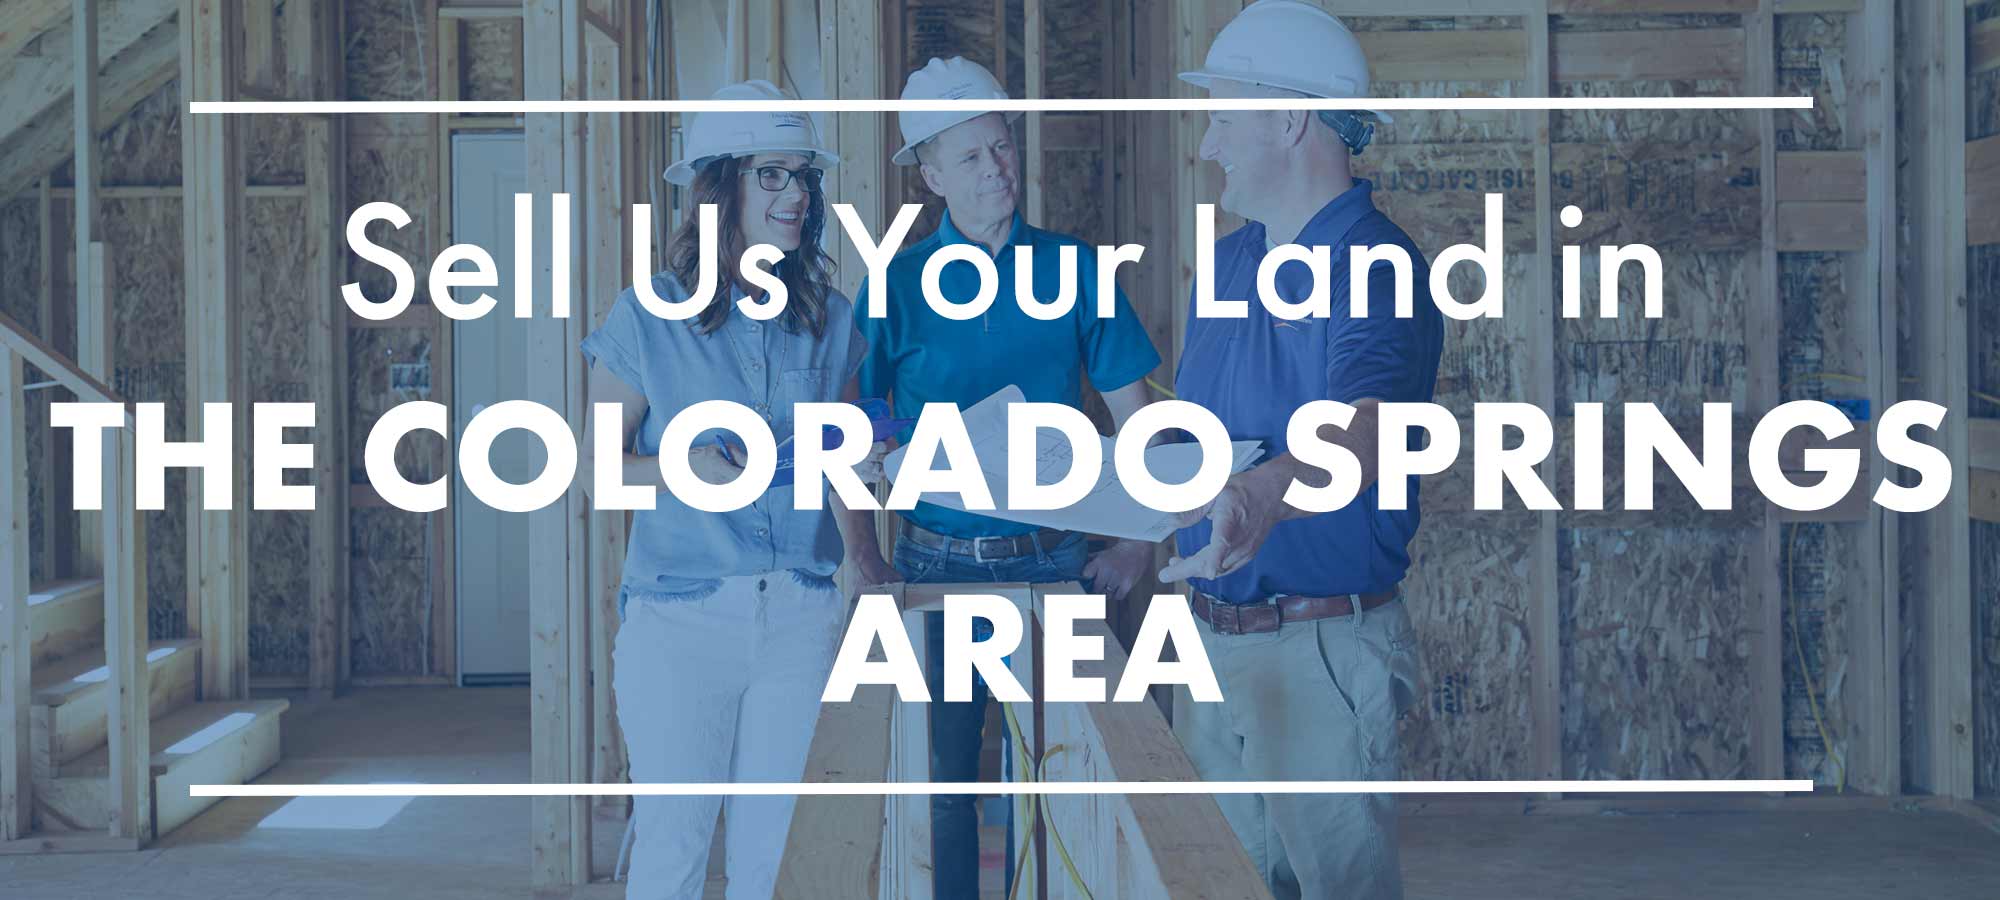 Sell Us Your Land in the Colorado Springs Area